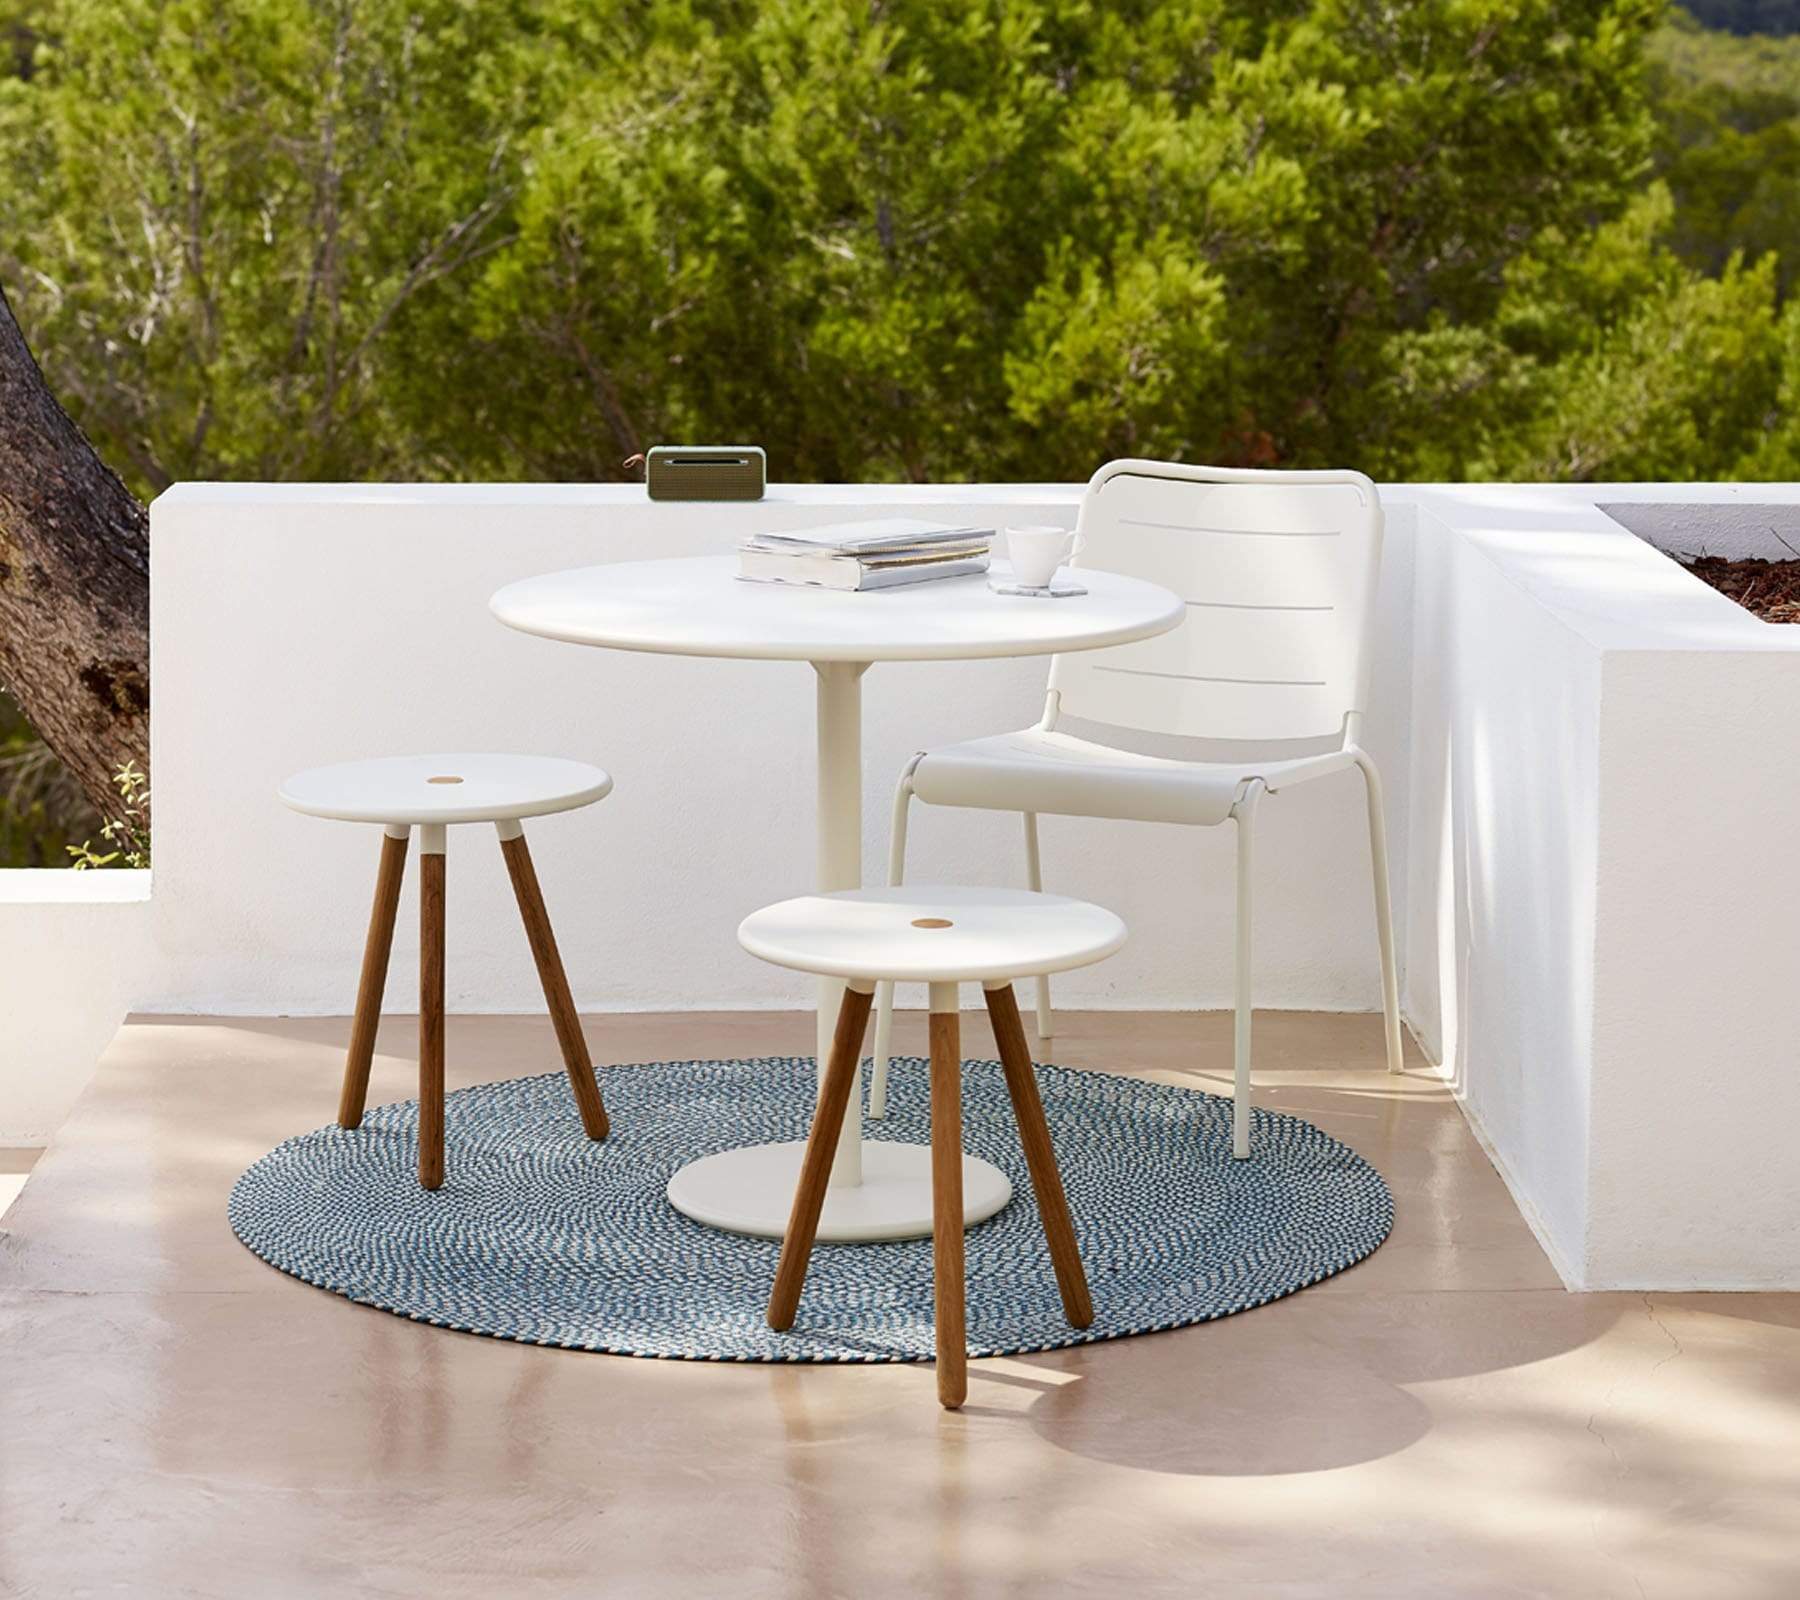 Boxhill's Area Coffee Table Chair White lifestyle image with Go Outdoor Round Cafe Table White